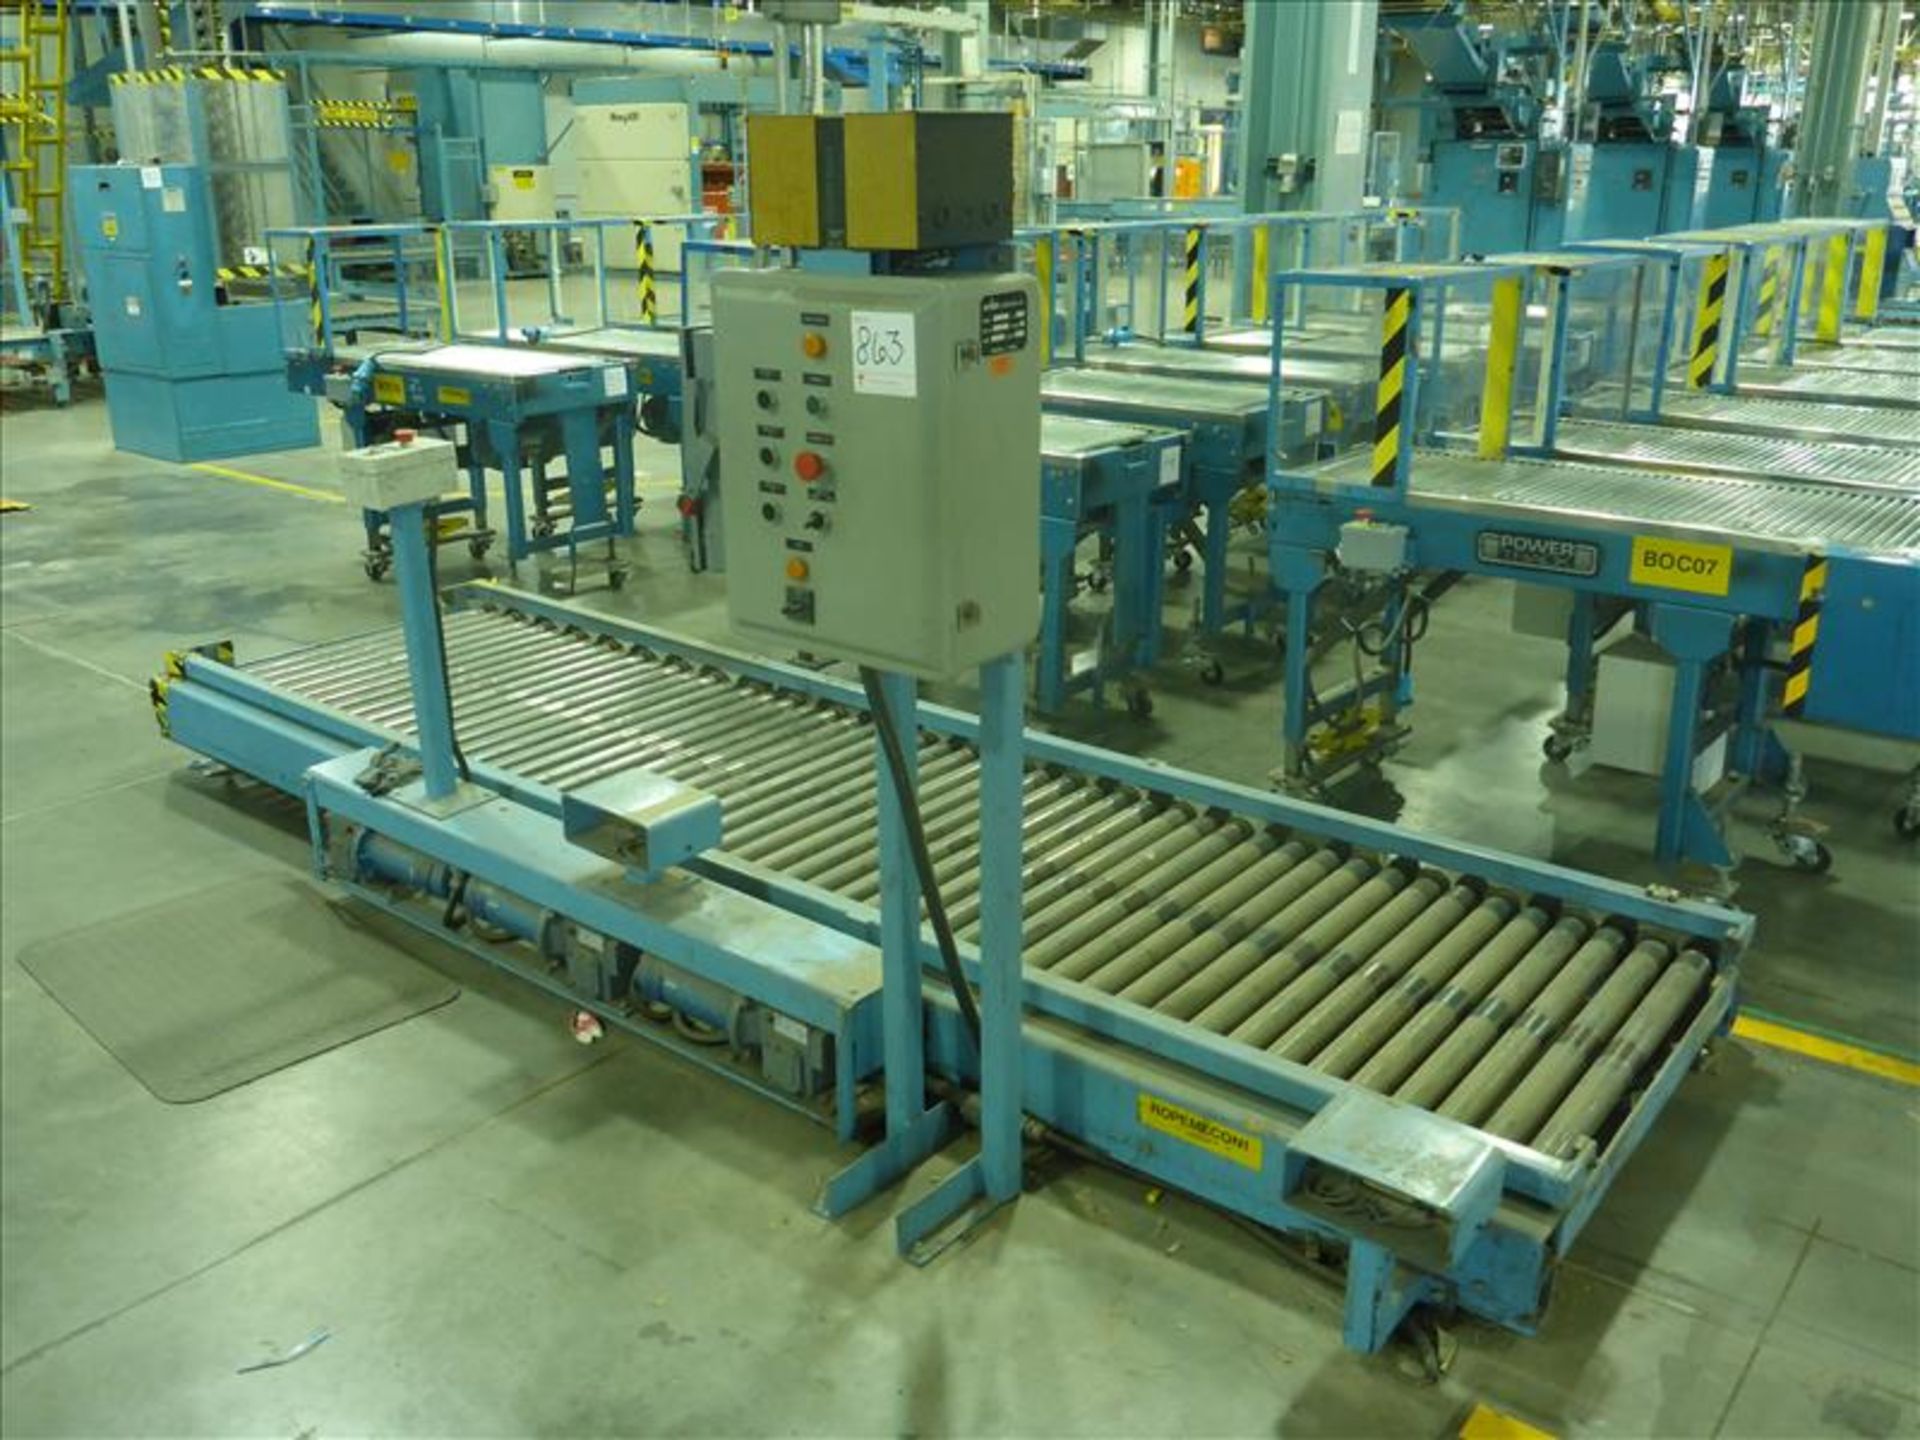 Orion power roller conveyor, mod. CY44, approx. 38 in. x 153 in. c/w control panel